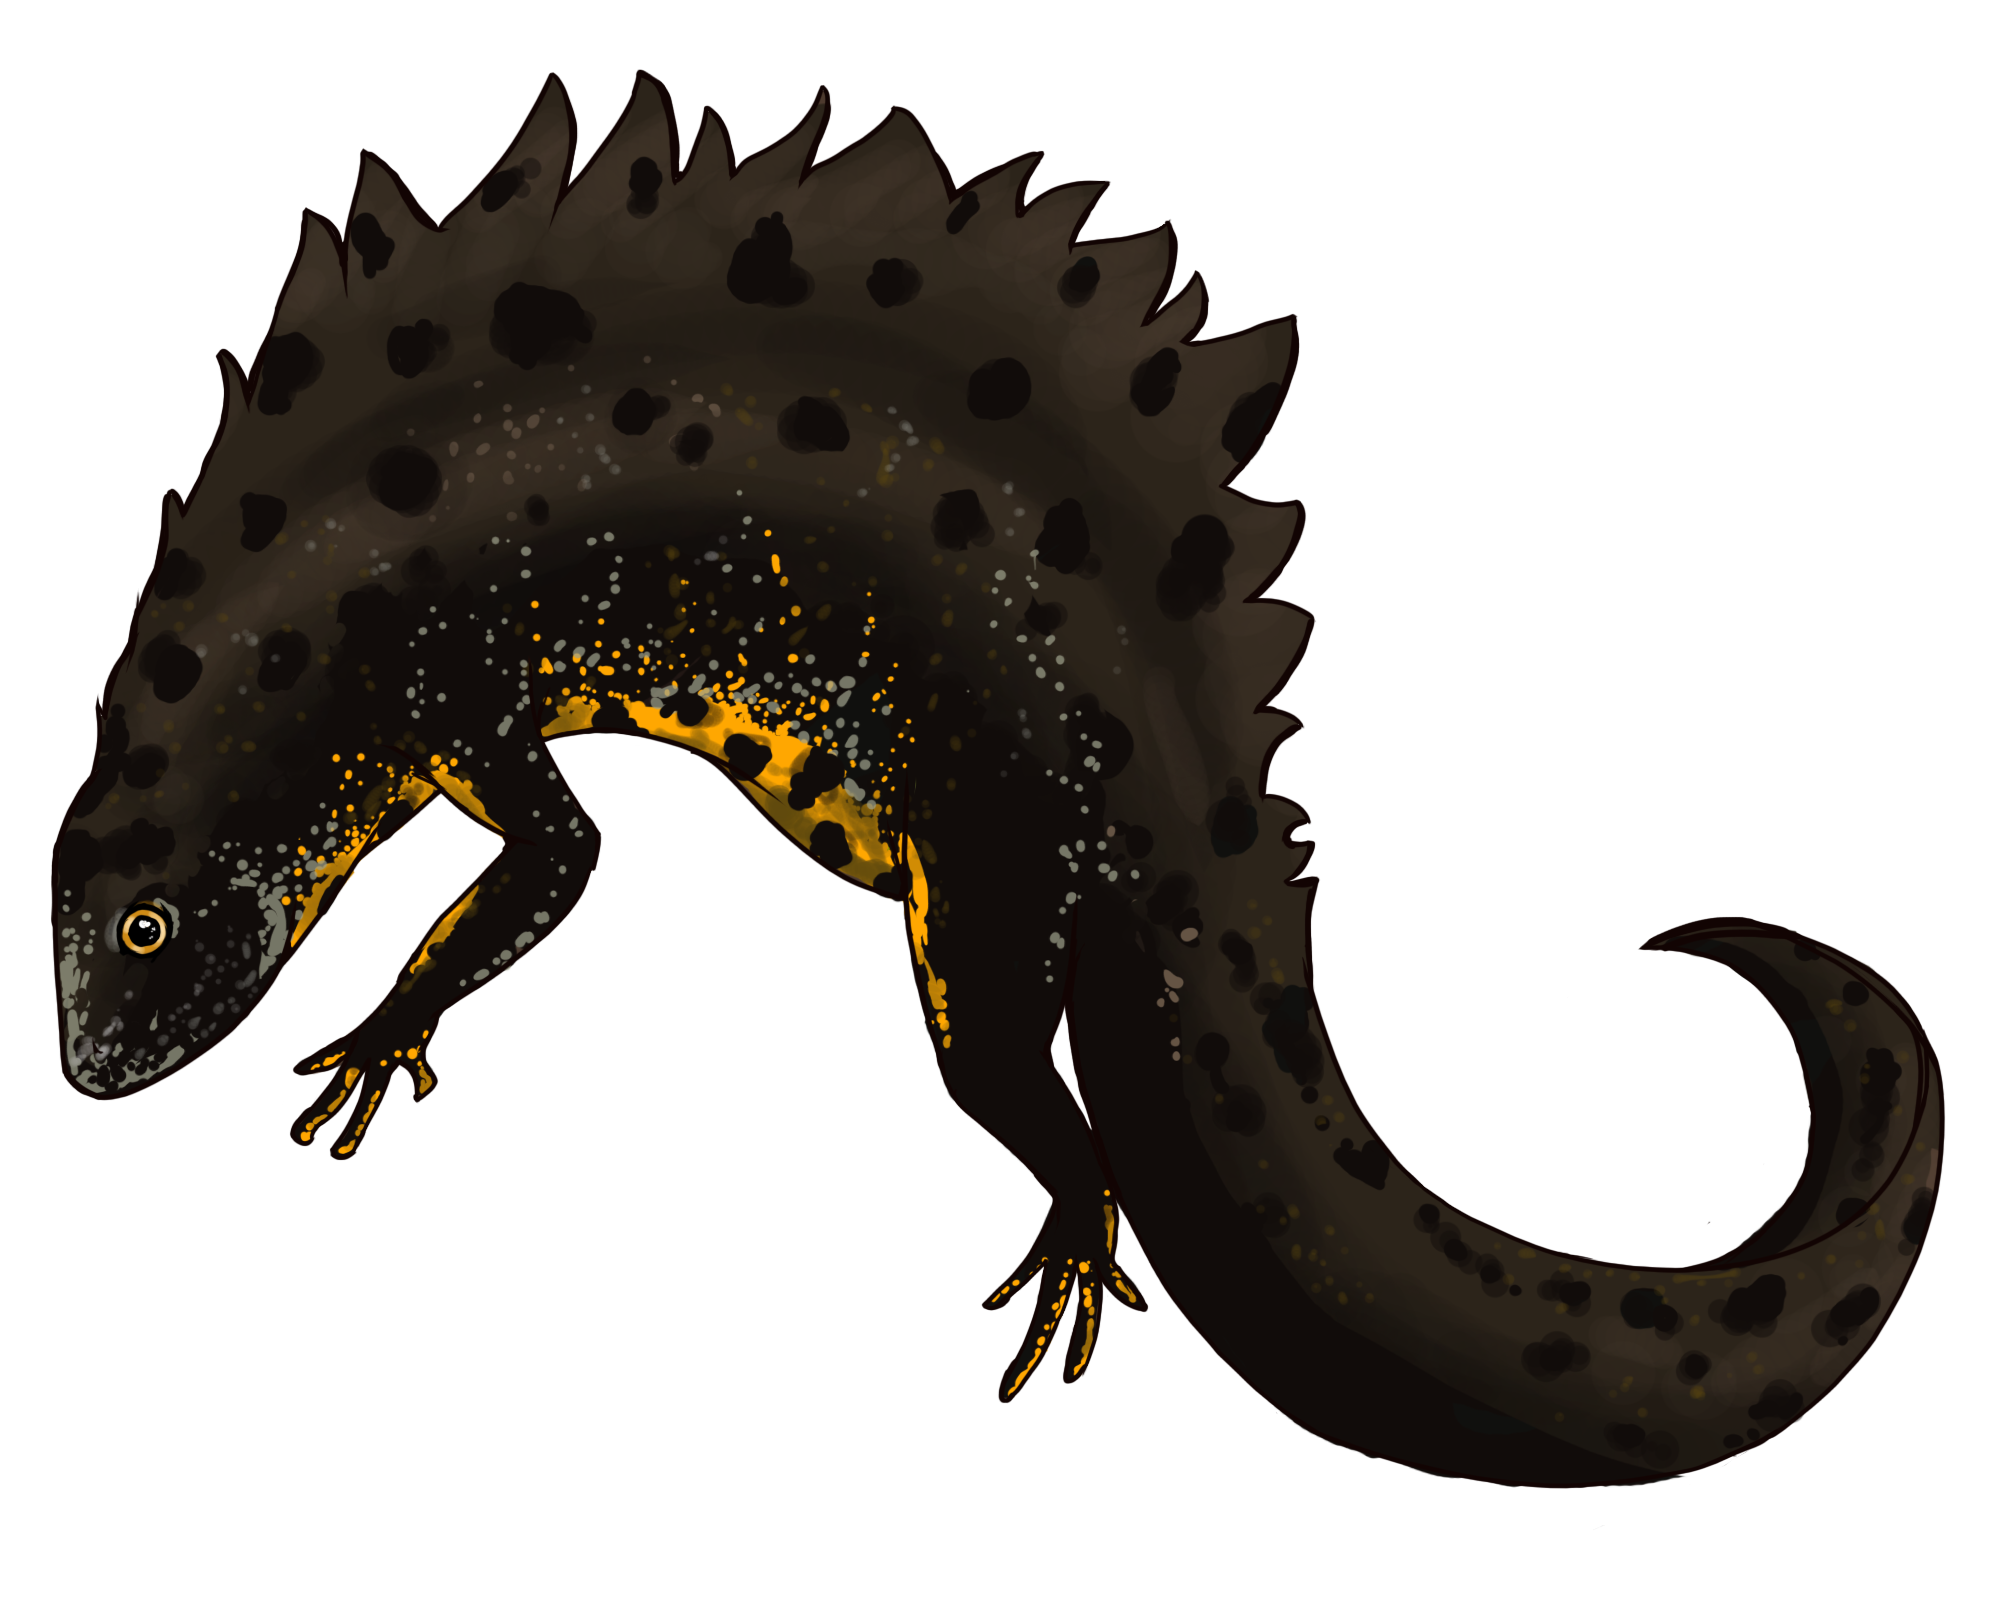 Great Crested Newt by Robyn Womack